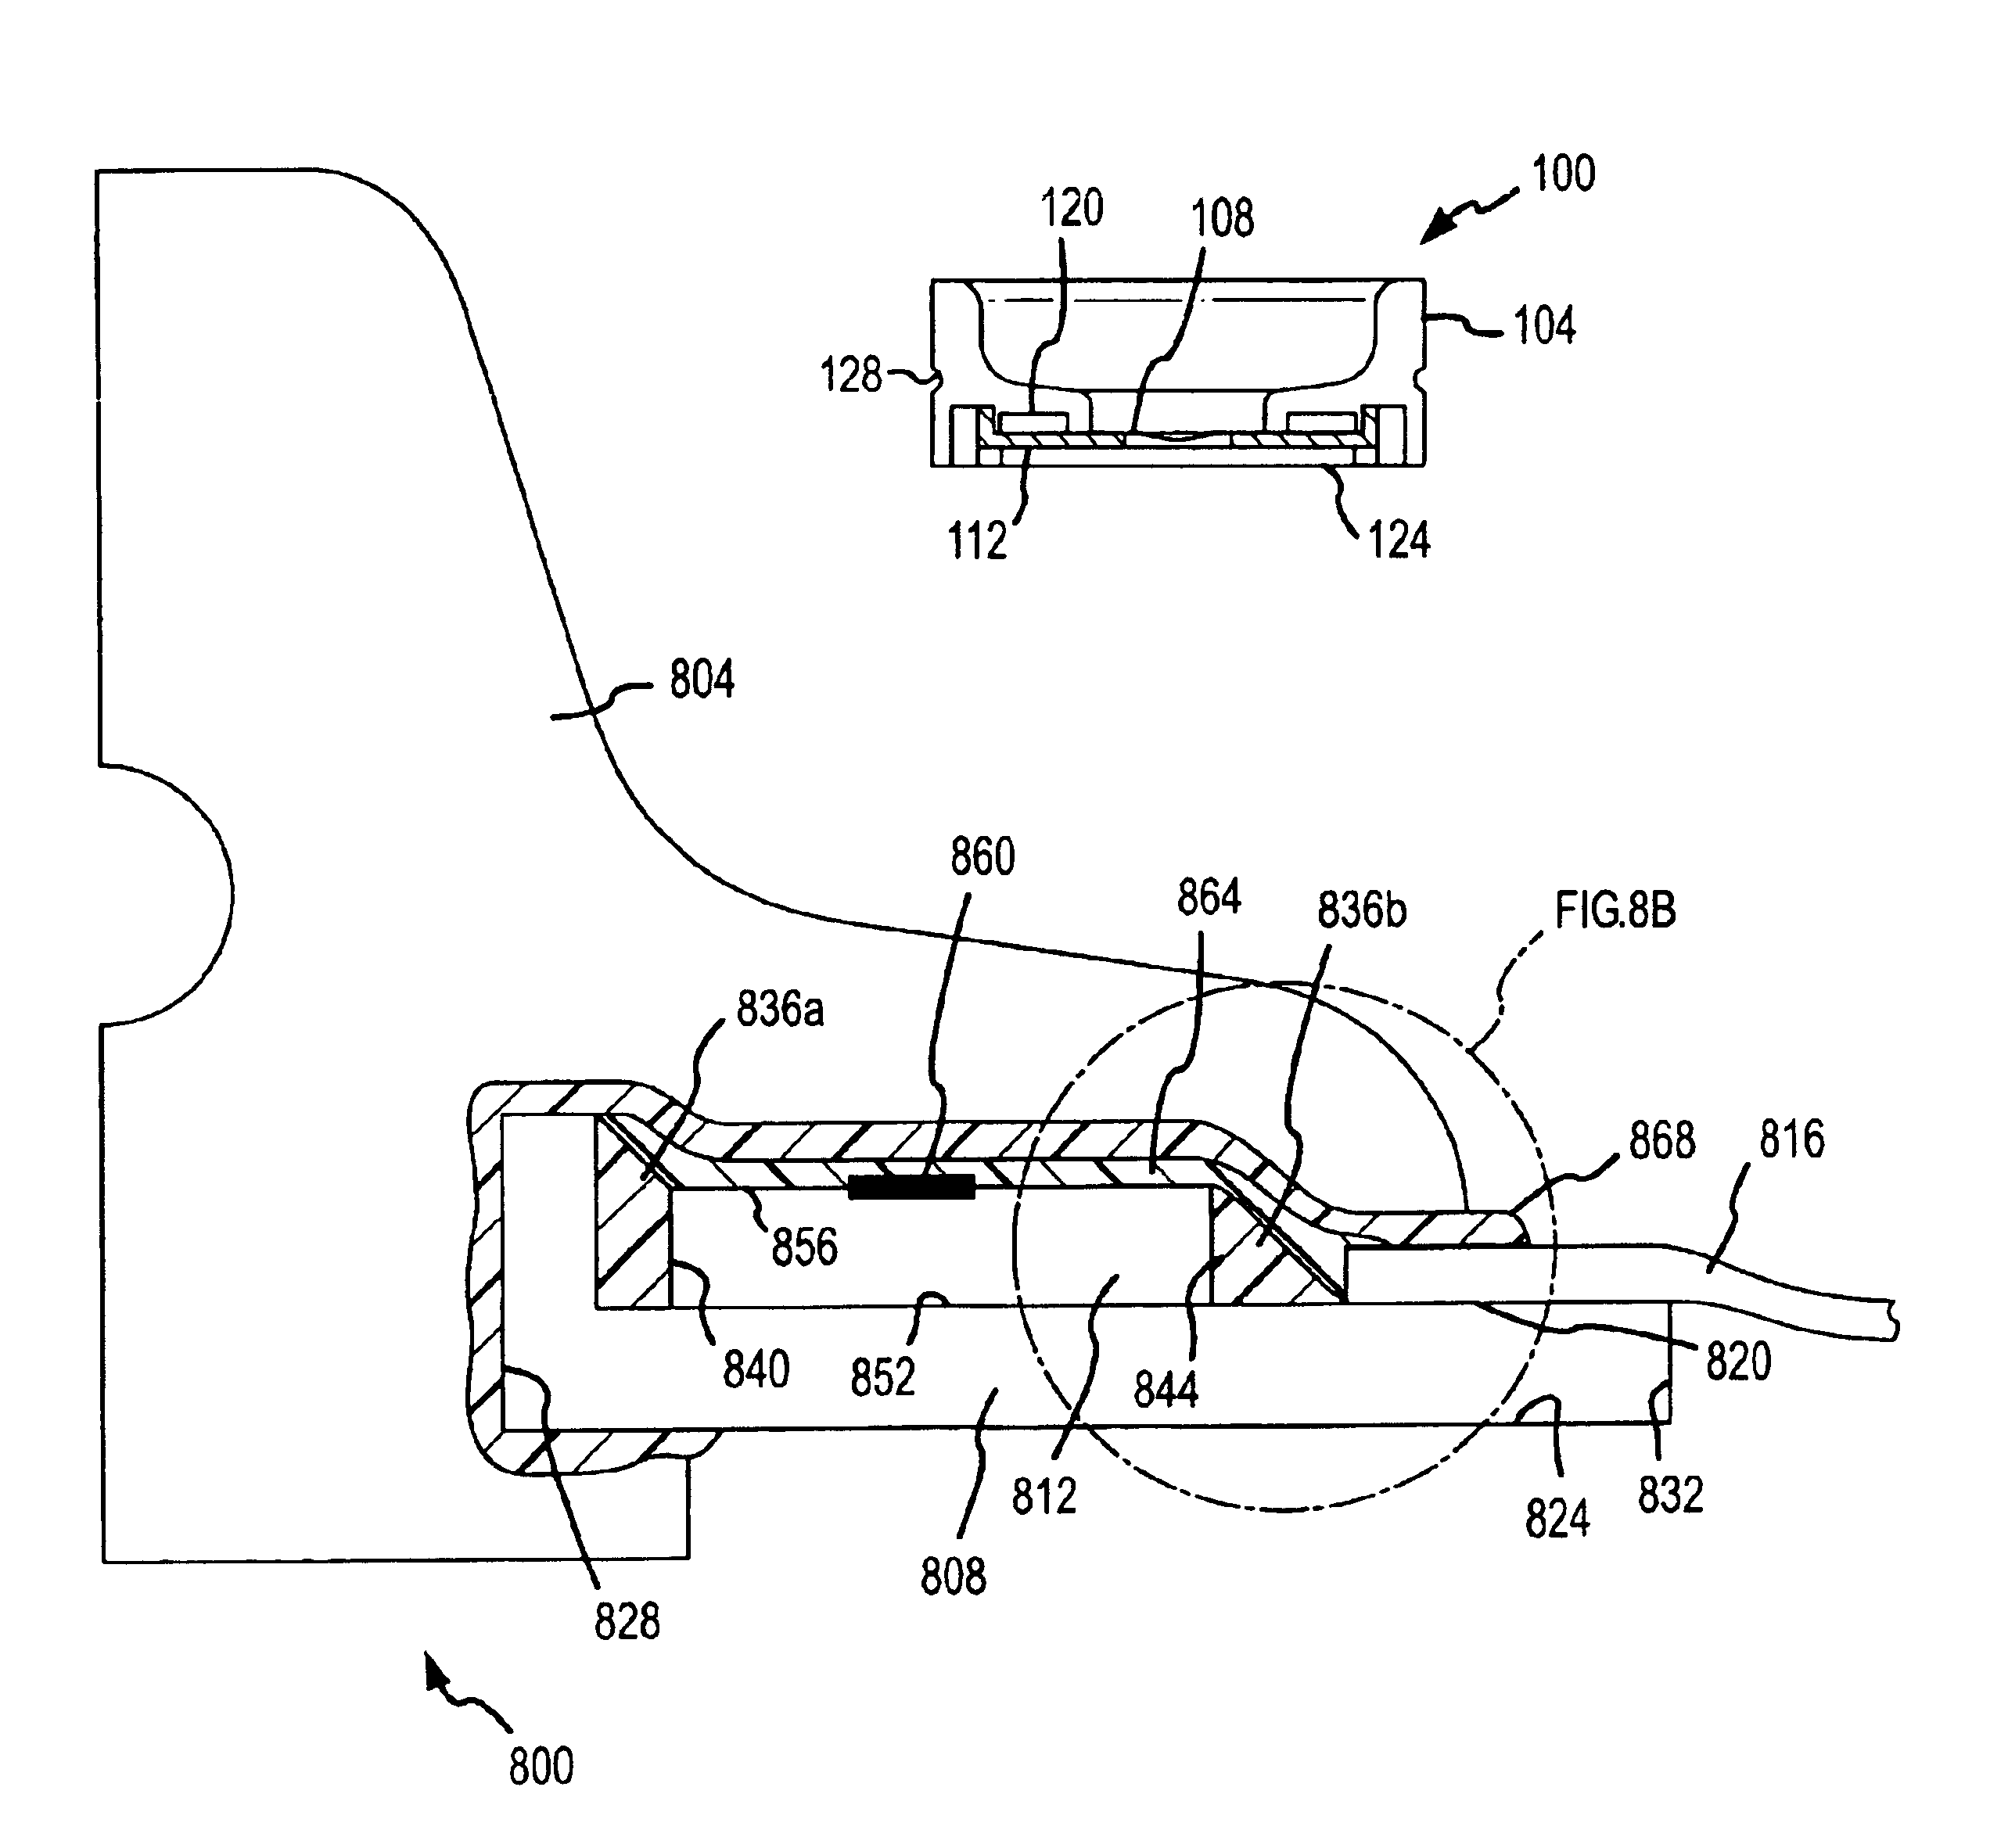 Apparatus for providing aerosol for medical treatment and methods